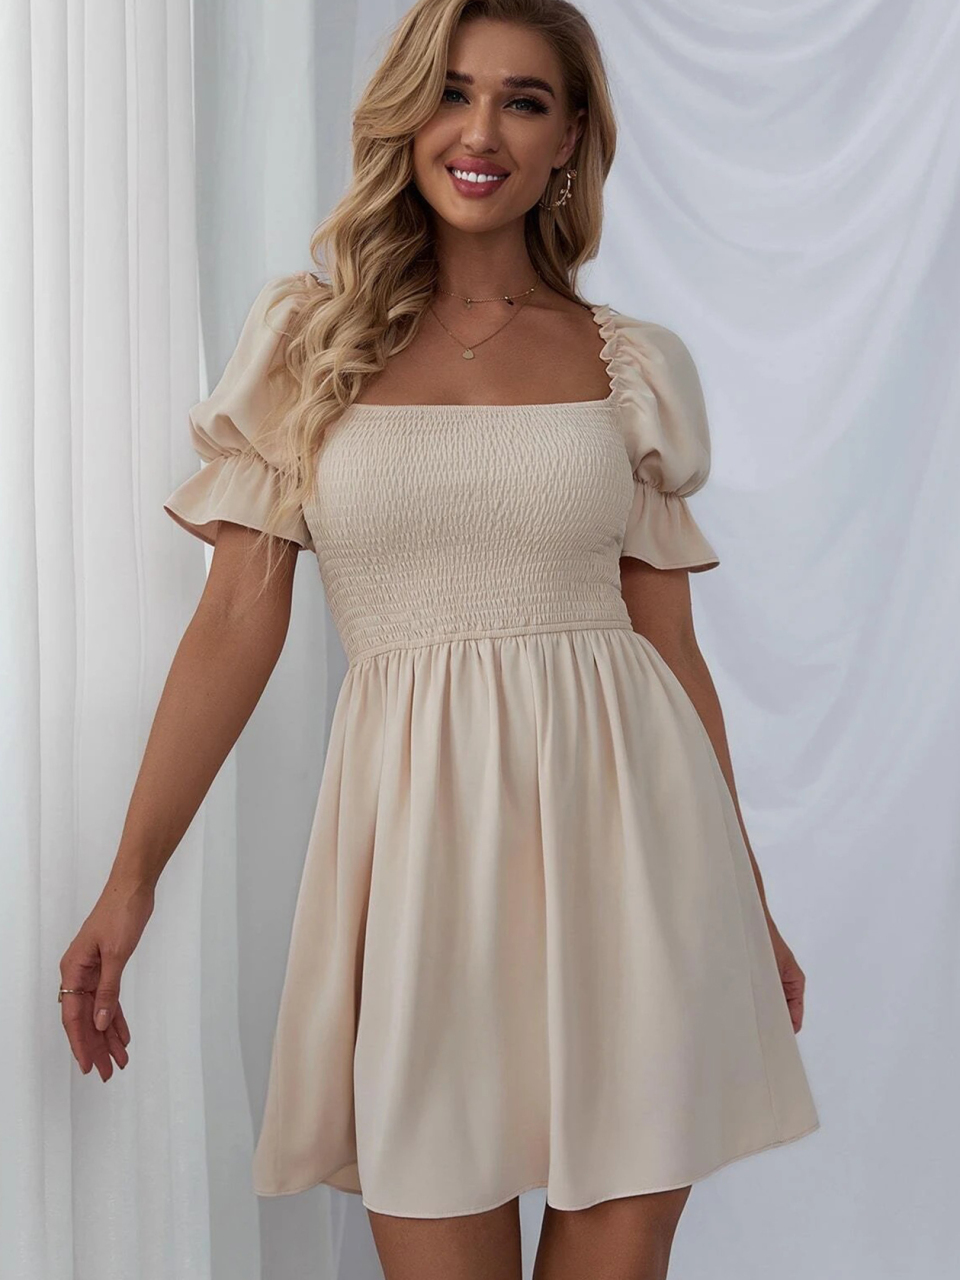 Women's Puff Sleeve Short Sleeve Solid Color Dress